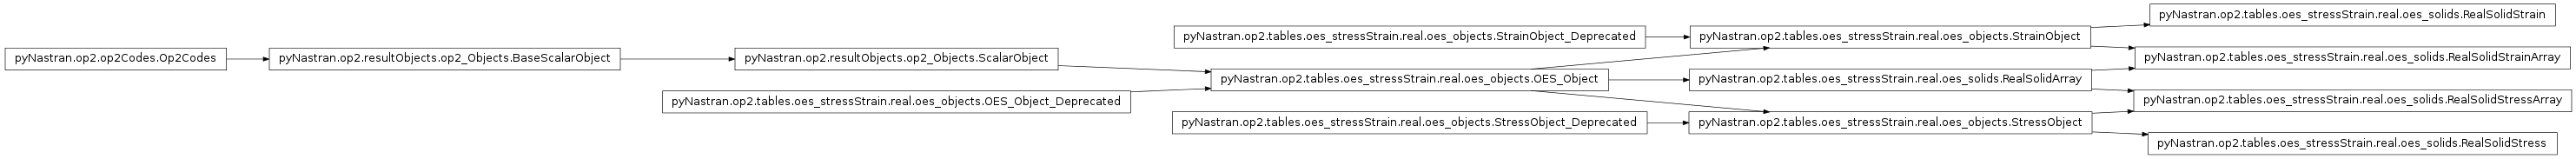 Inheritance diagram of pyNastran.op2.tables.oes_stressStrain.real.oes_solids